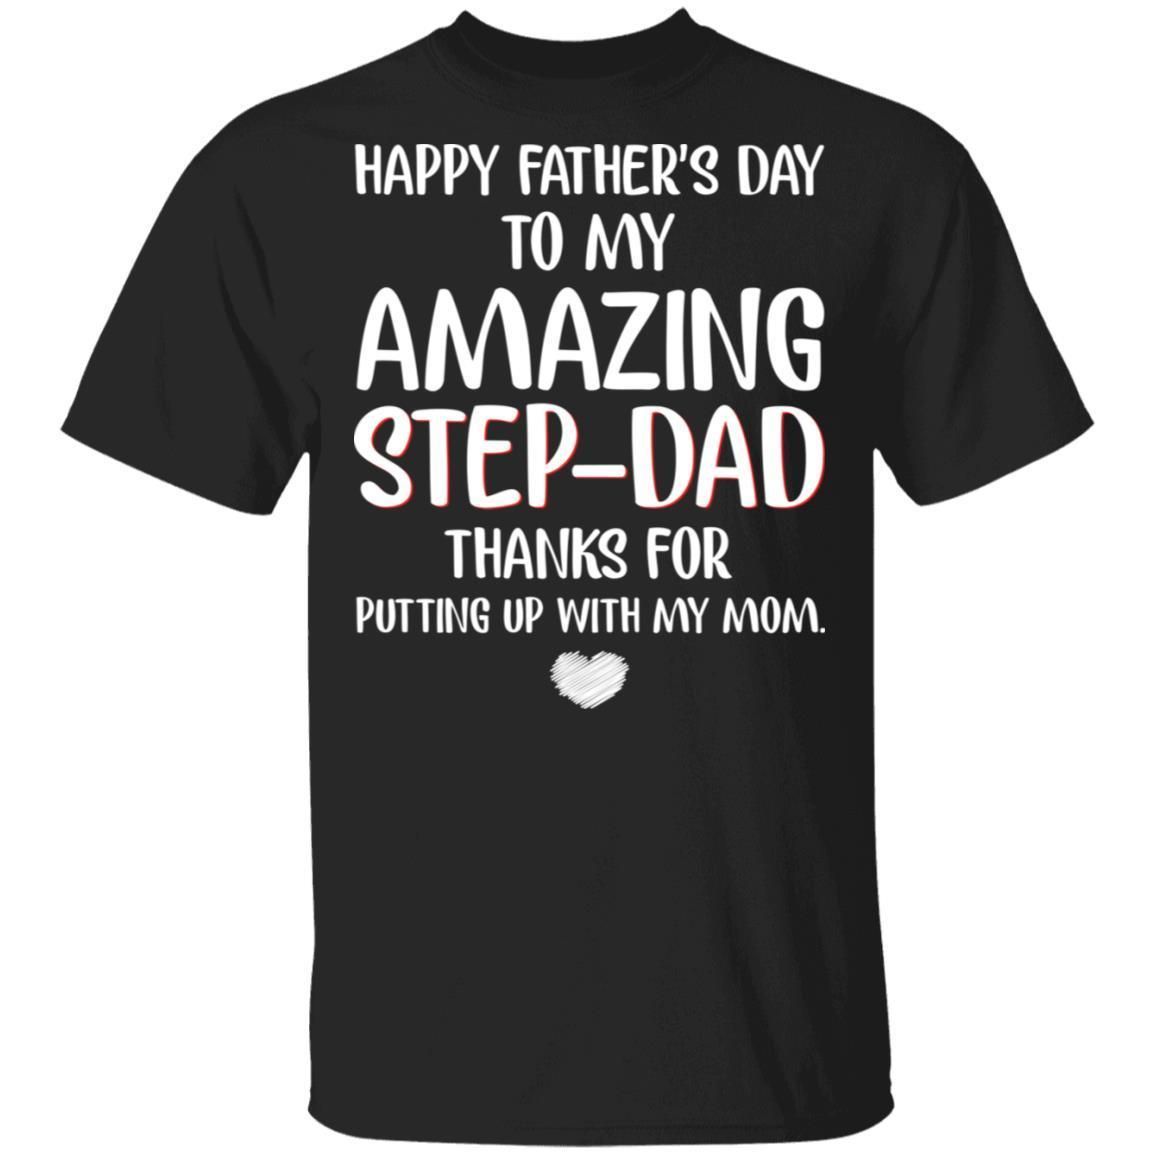 Happy Father's Day To My Amazing Step Dad Thanks for Putting Up With My Mom shirts